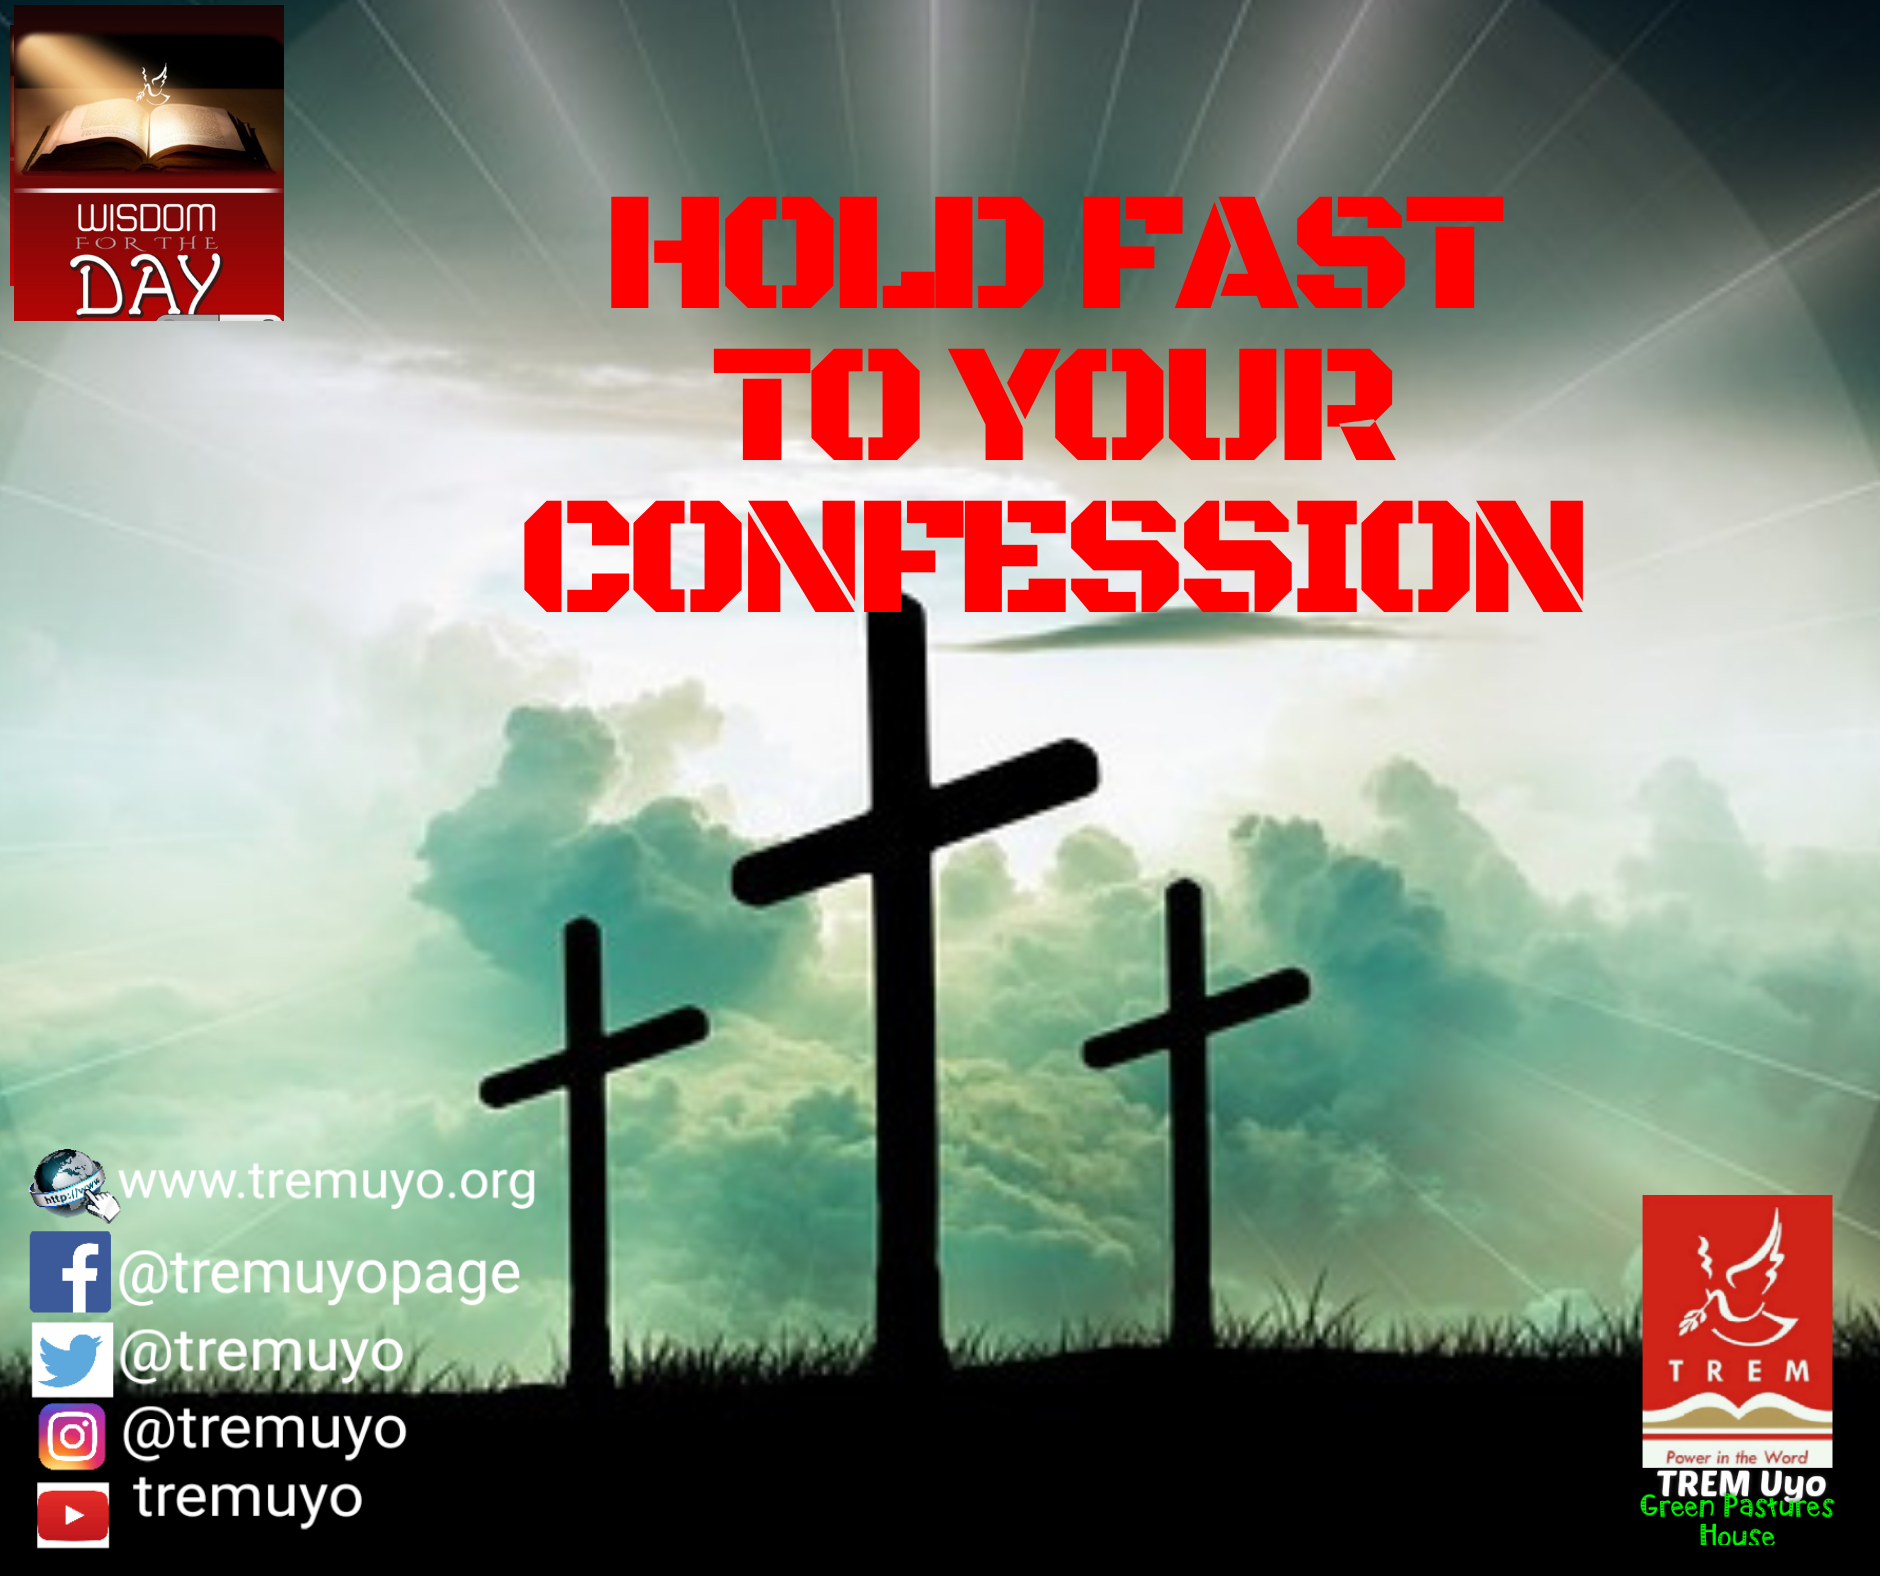 HOLD FAST TO YOUR CONFESSION